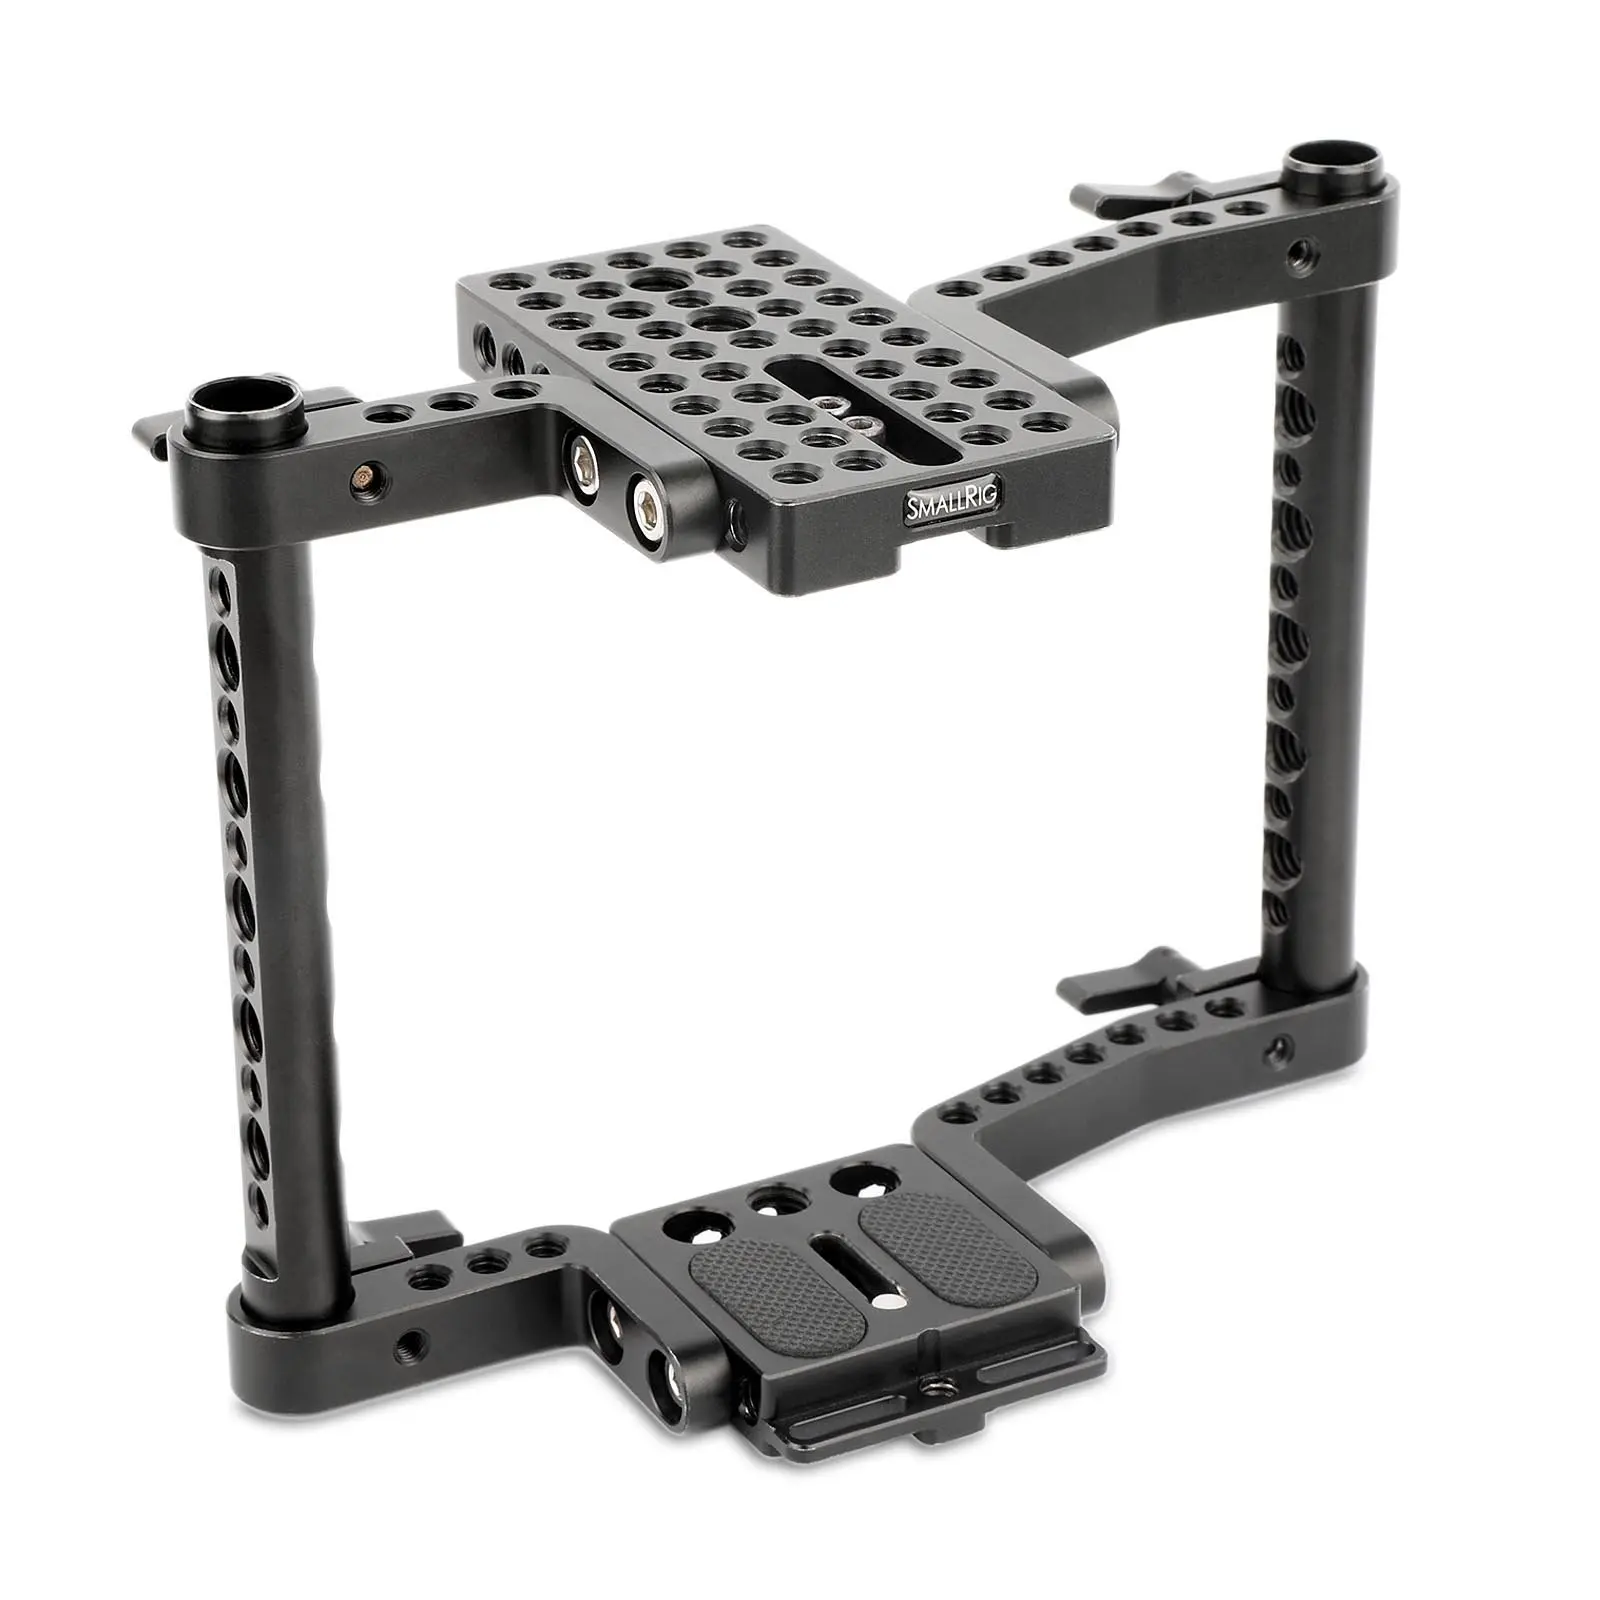 Kiwifotos Camera Macro Focusing Rail Slider with Arca Type Quick Release for Canon 6D Mark II 7D Mark II 5D Mark IV III 80D 70D Rebel T7 T6 T7i T6i Nikon D850 D7500 D5600 D5500 D3400 D3300 and More